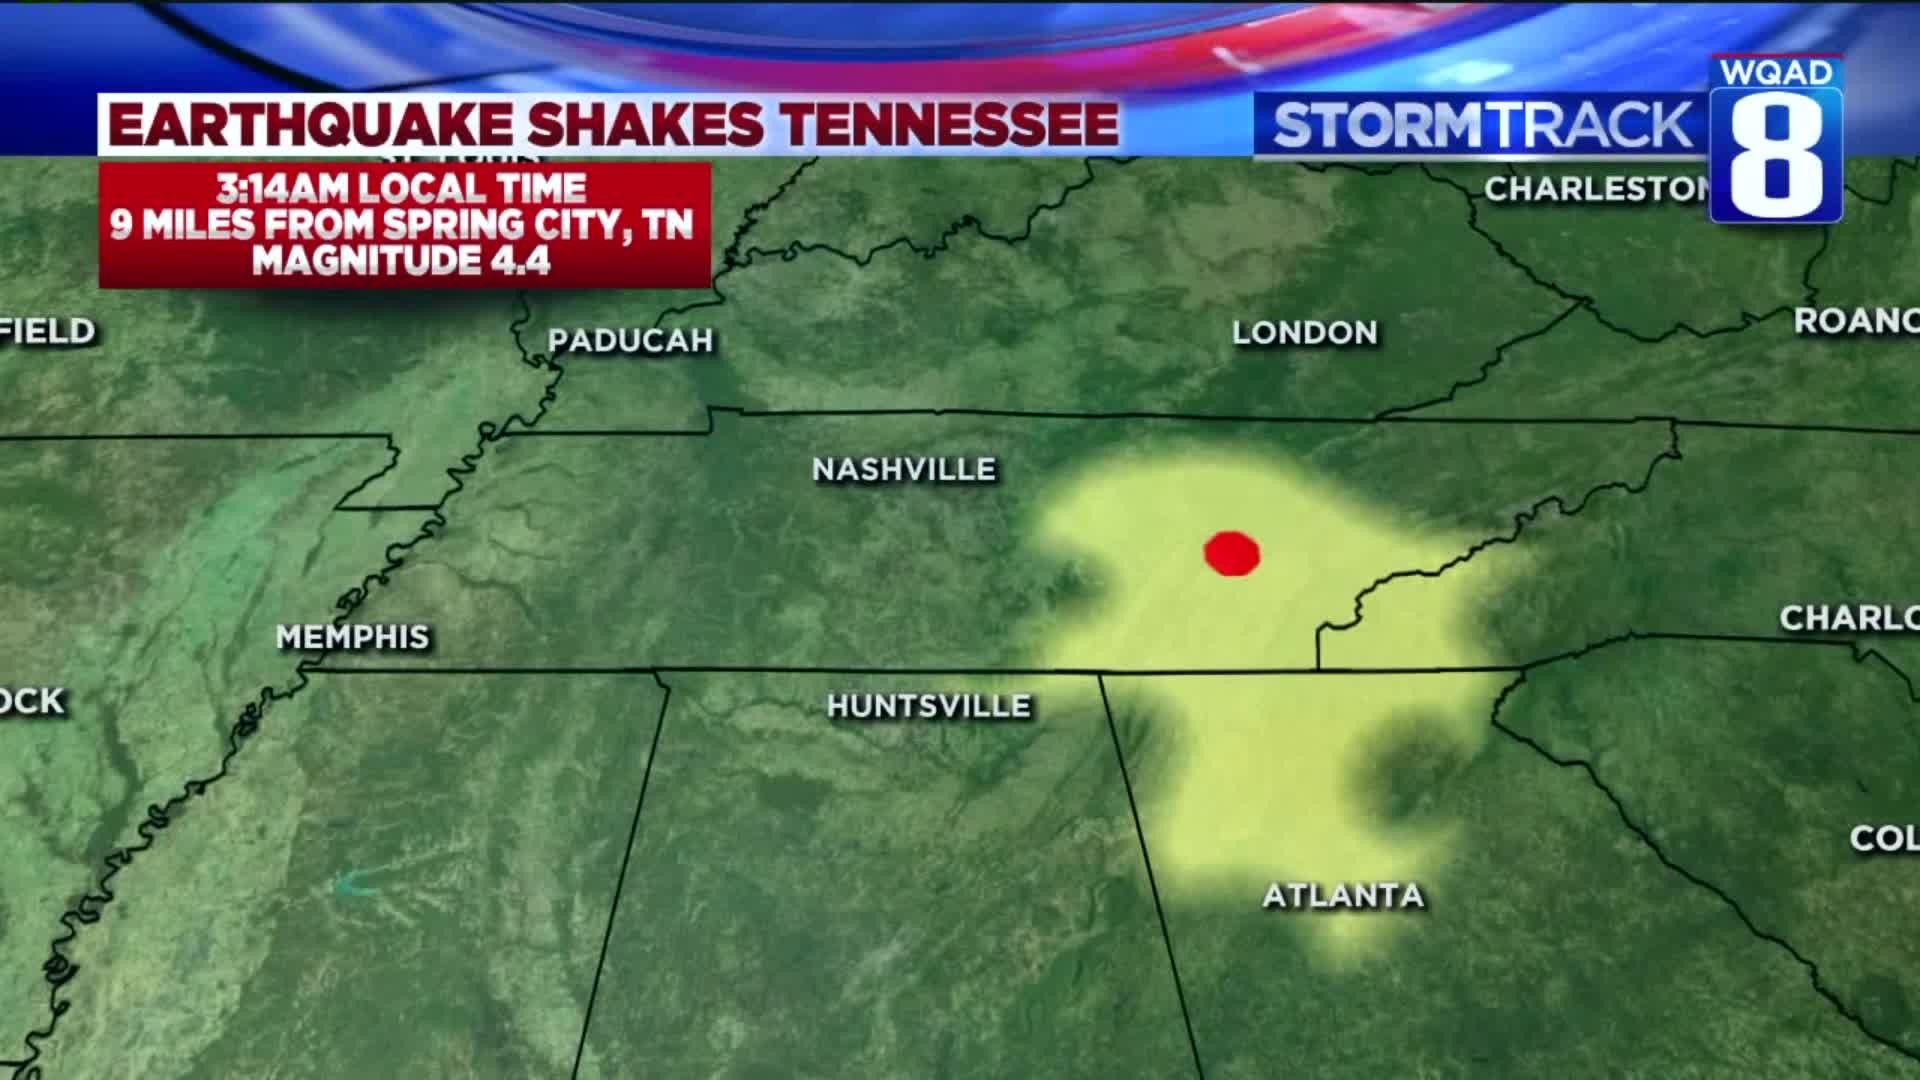 Eric talks about the Tennessee Earthquake